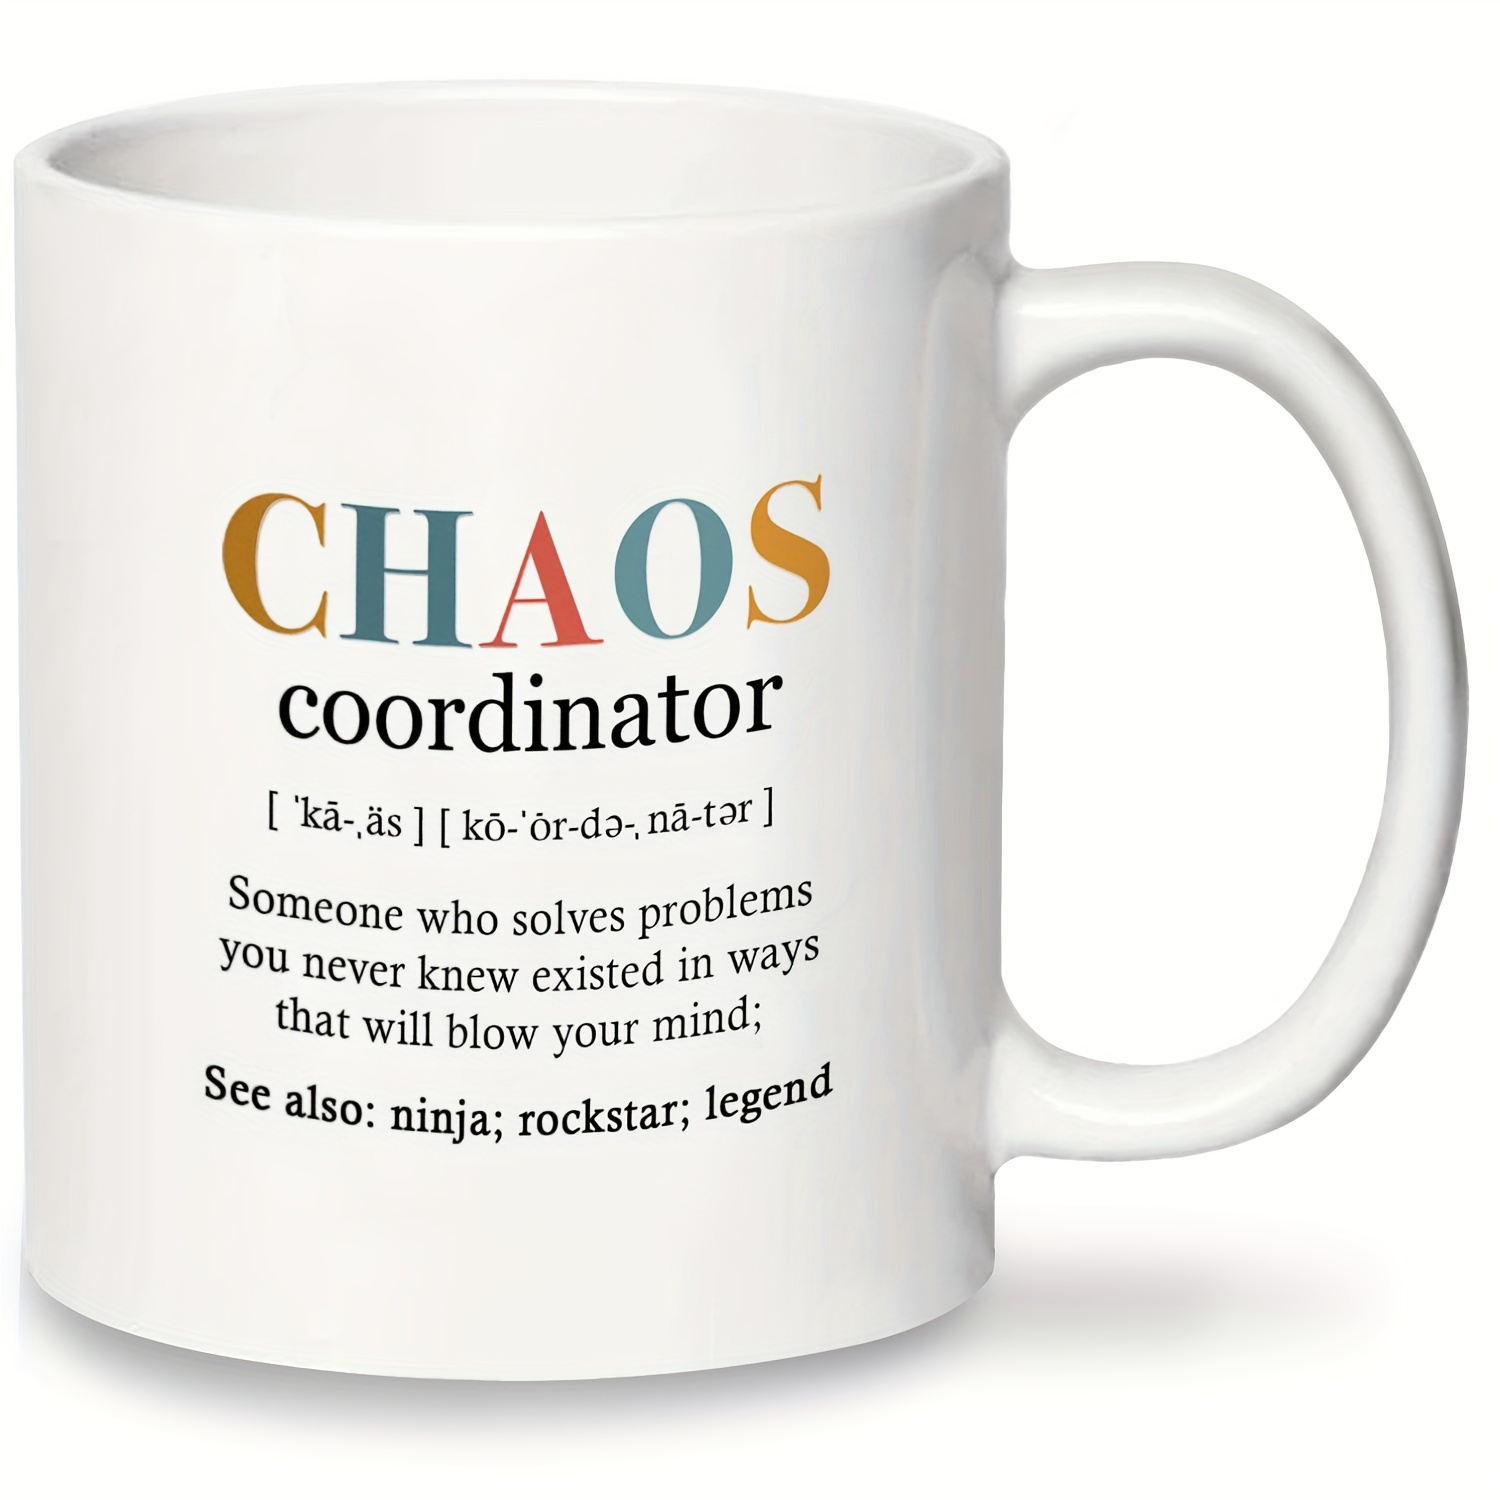 1pc, Ceramic Cup Coworker Gifts For Women, Chaos Coordinator Gifts For  Boss, Assistant, Teacher, Funny Appreciation, Inspirational Work Gifts For  Cowo